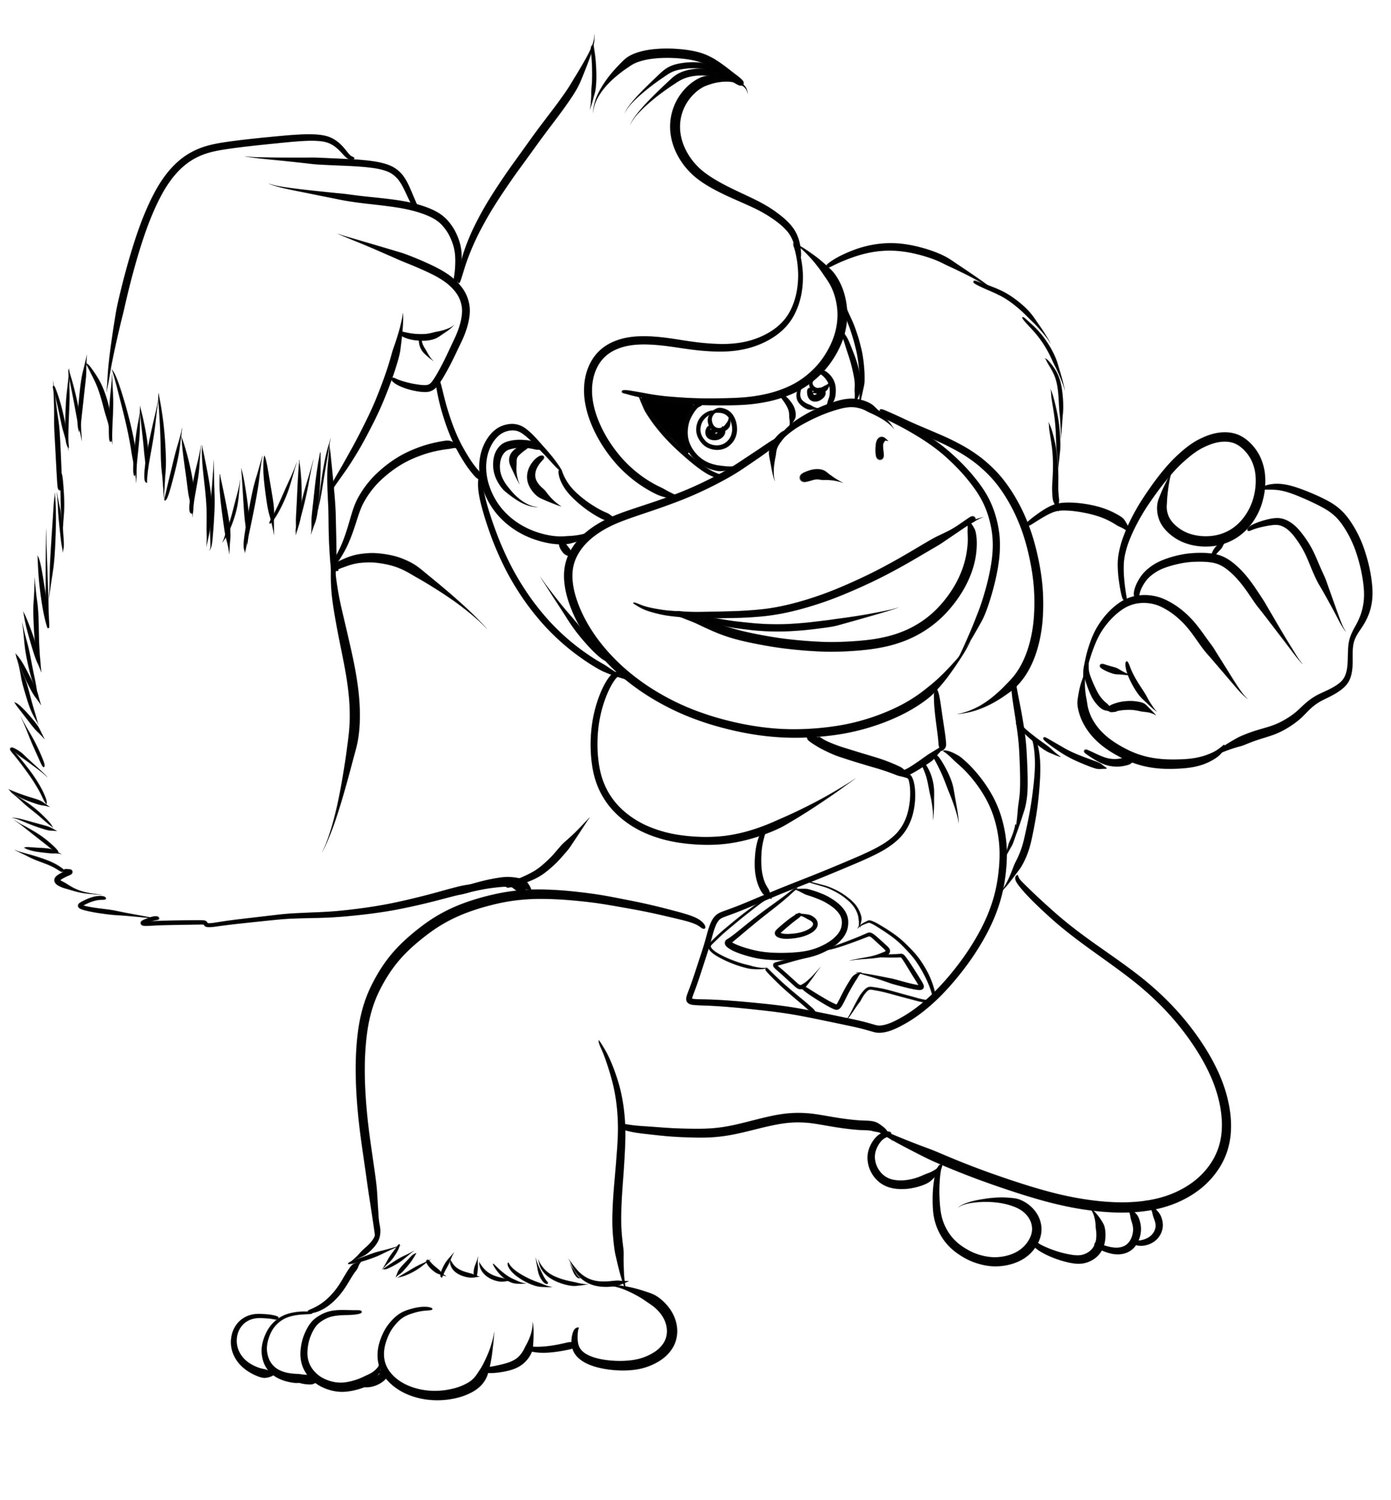 Donkey Kong 04  coloring page to print and coloring